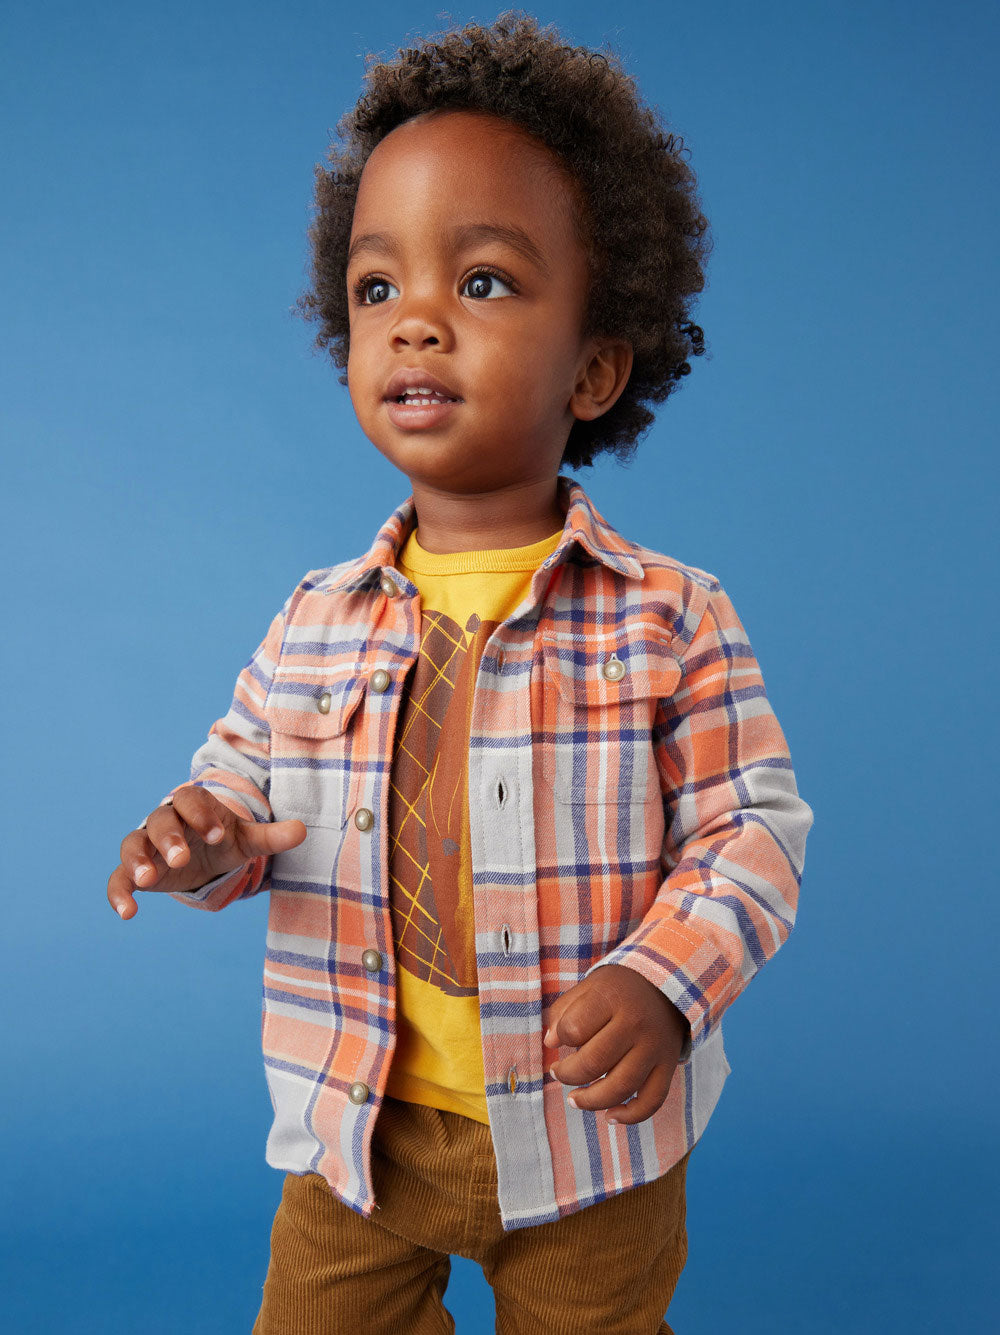 Tea Collection Flannel Button Up Baby Shirt - Kobe Plaid 